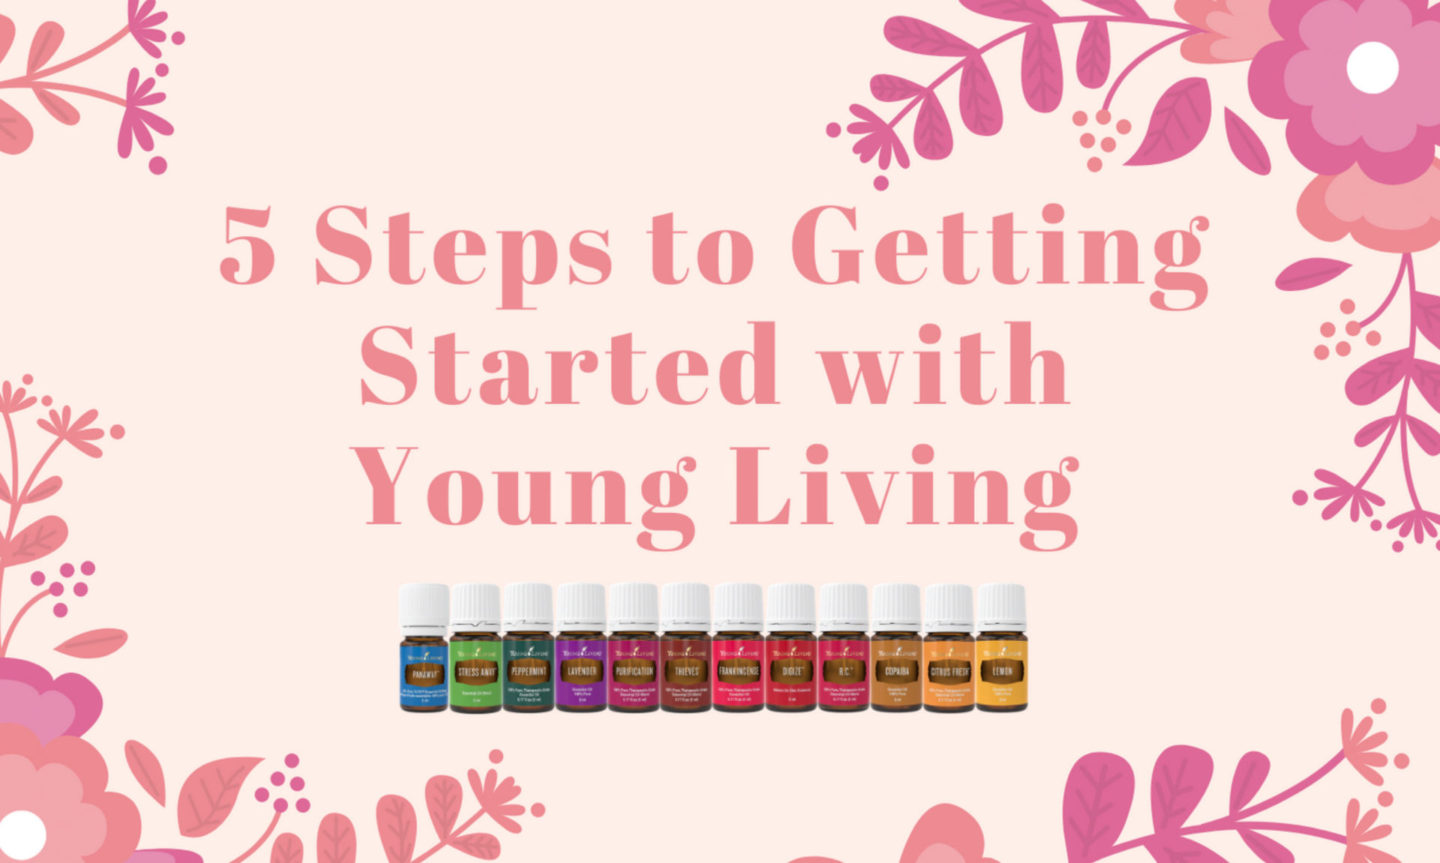 Five easy steps to purchasing a Young Living starter kit and becoming a Young Living member